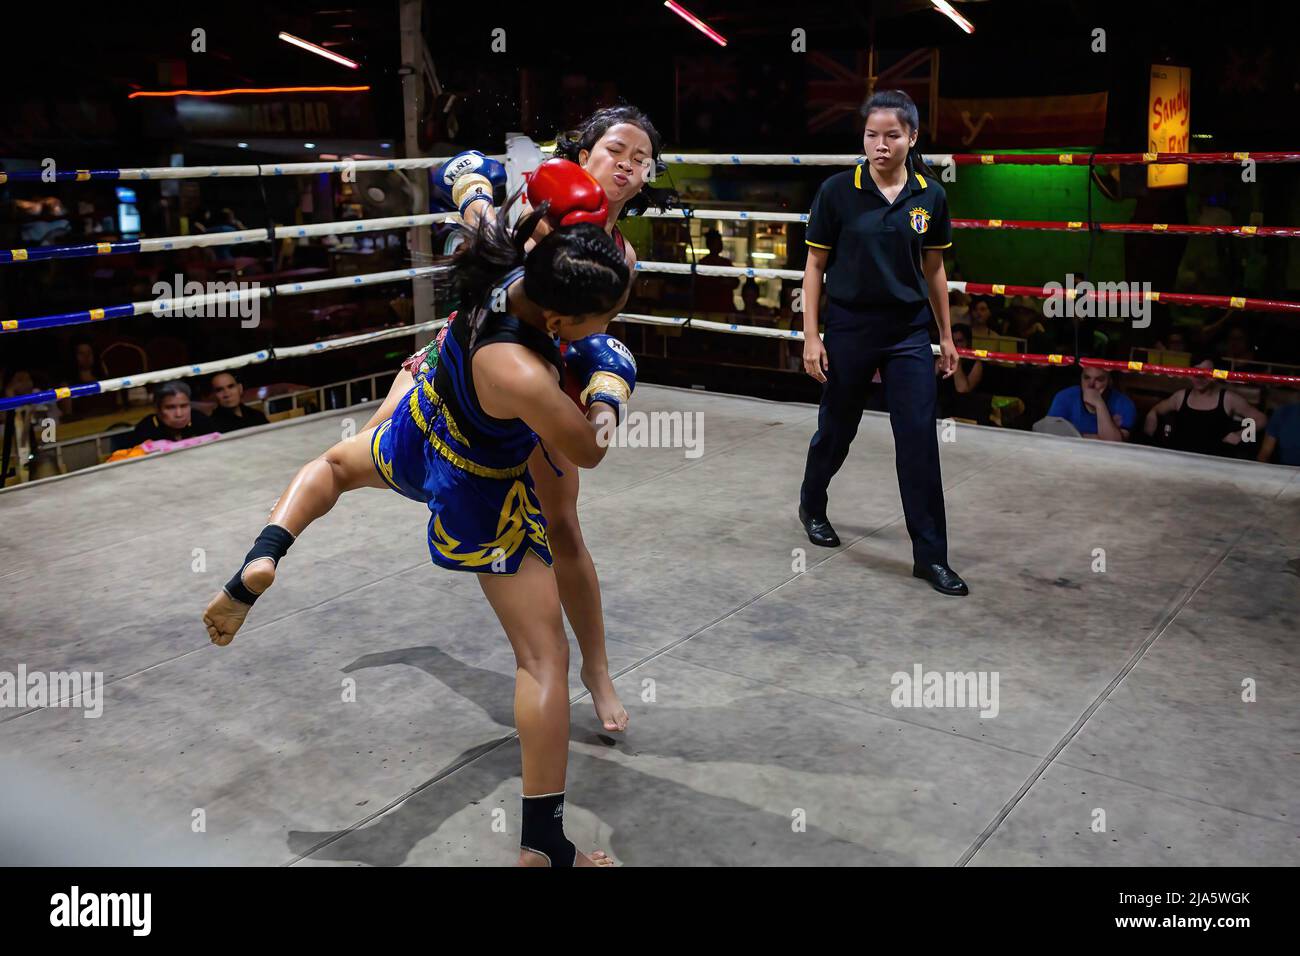 Naem Peaw punches Waewdoa during combat at Thaphae International Boxing stadium. Years ago seeing women in a ring fighting (Muay Thai) in Thailand was almost unheard of, unless it was in a ceremonial fight in the local temple during the festive season. Nowadays, things are changing and more women are joining the sport. The city of Chiang Mai is the epicentre of this change with the support of a local promoter that sees the sport as a way to promote equality, and the growing interest in the sport by foreigners flocking into the city. In some Muay Thai gyms, women already overpass the number of Stock Photo